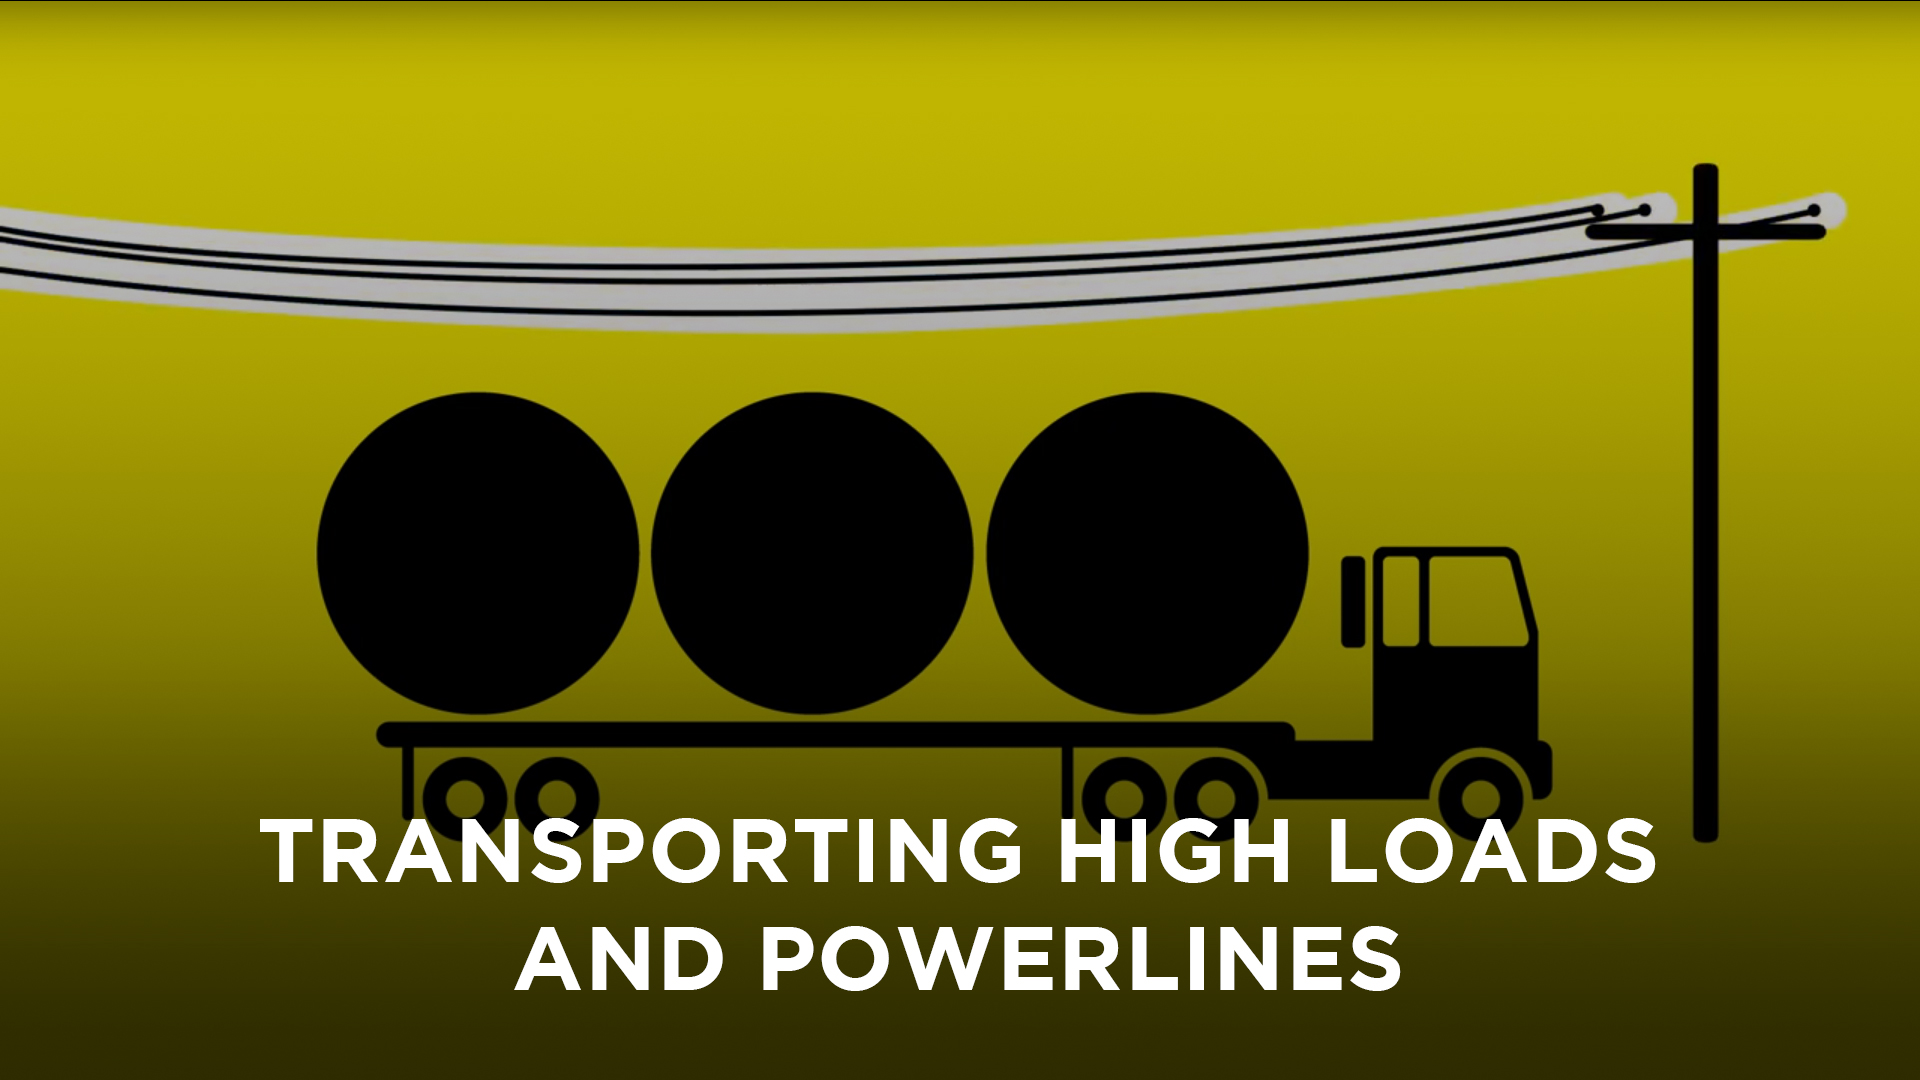 Cartoon of a truck with a high load very close to powerlines